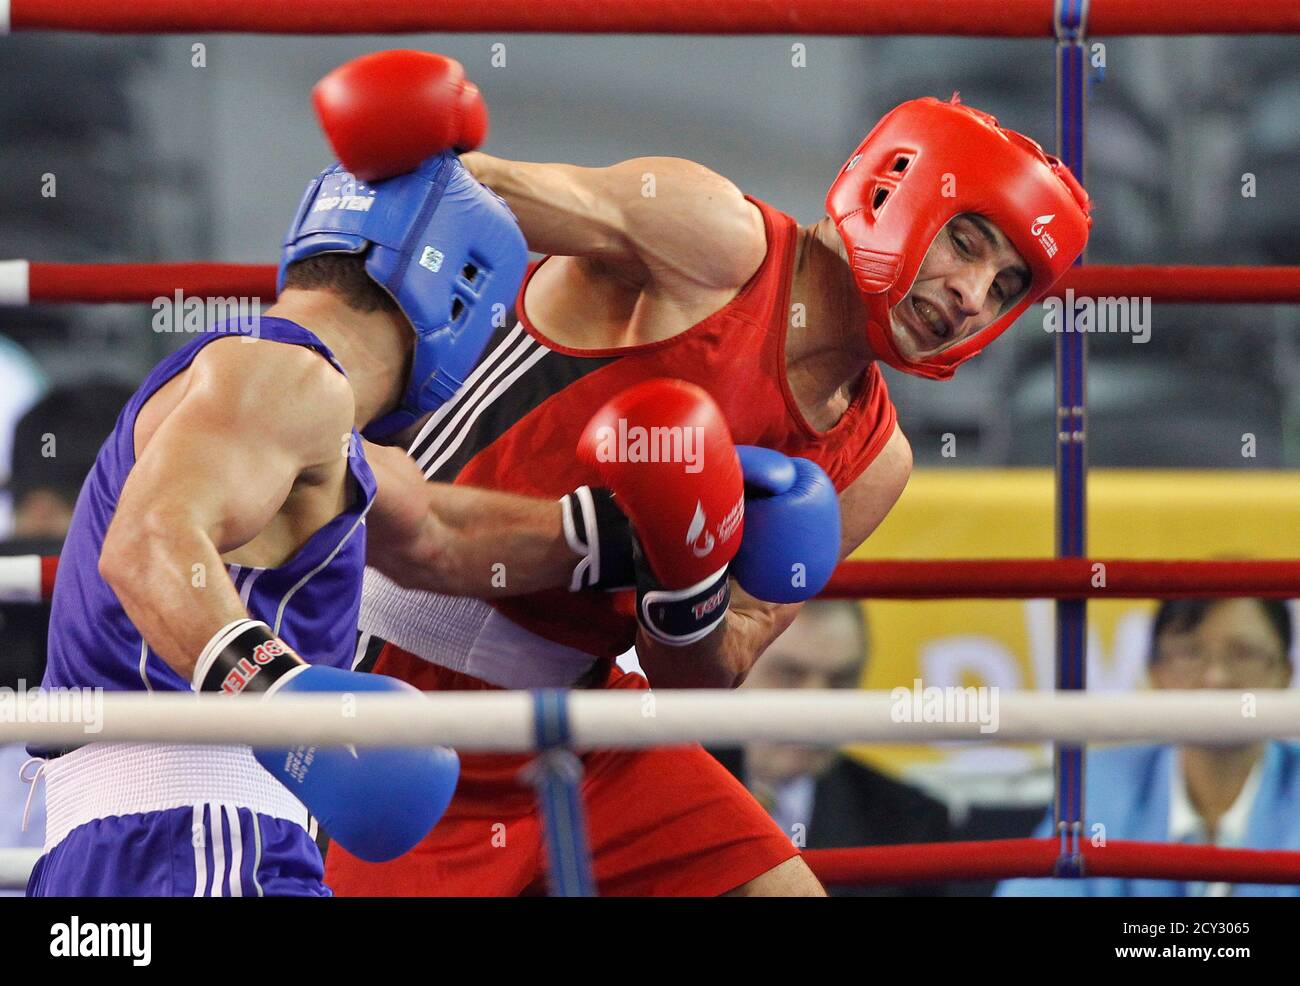 Mohamed Hikal of Egypt (red) fights against Hzam Ahmad Nabah of Qatar  during their men's 75kg-middle quarterfinals boxing match at the Arab Games  in Doha December 14, 2011. REUTERS/Suhaib Salem (QATAR -